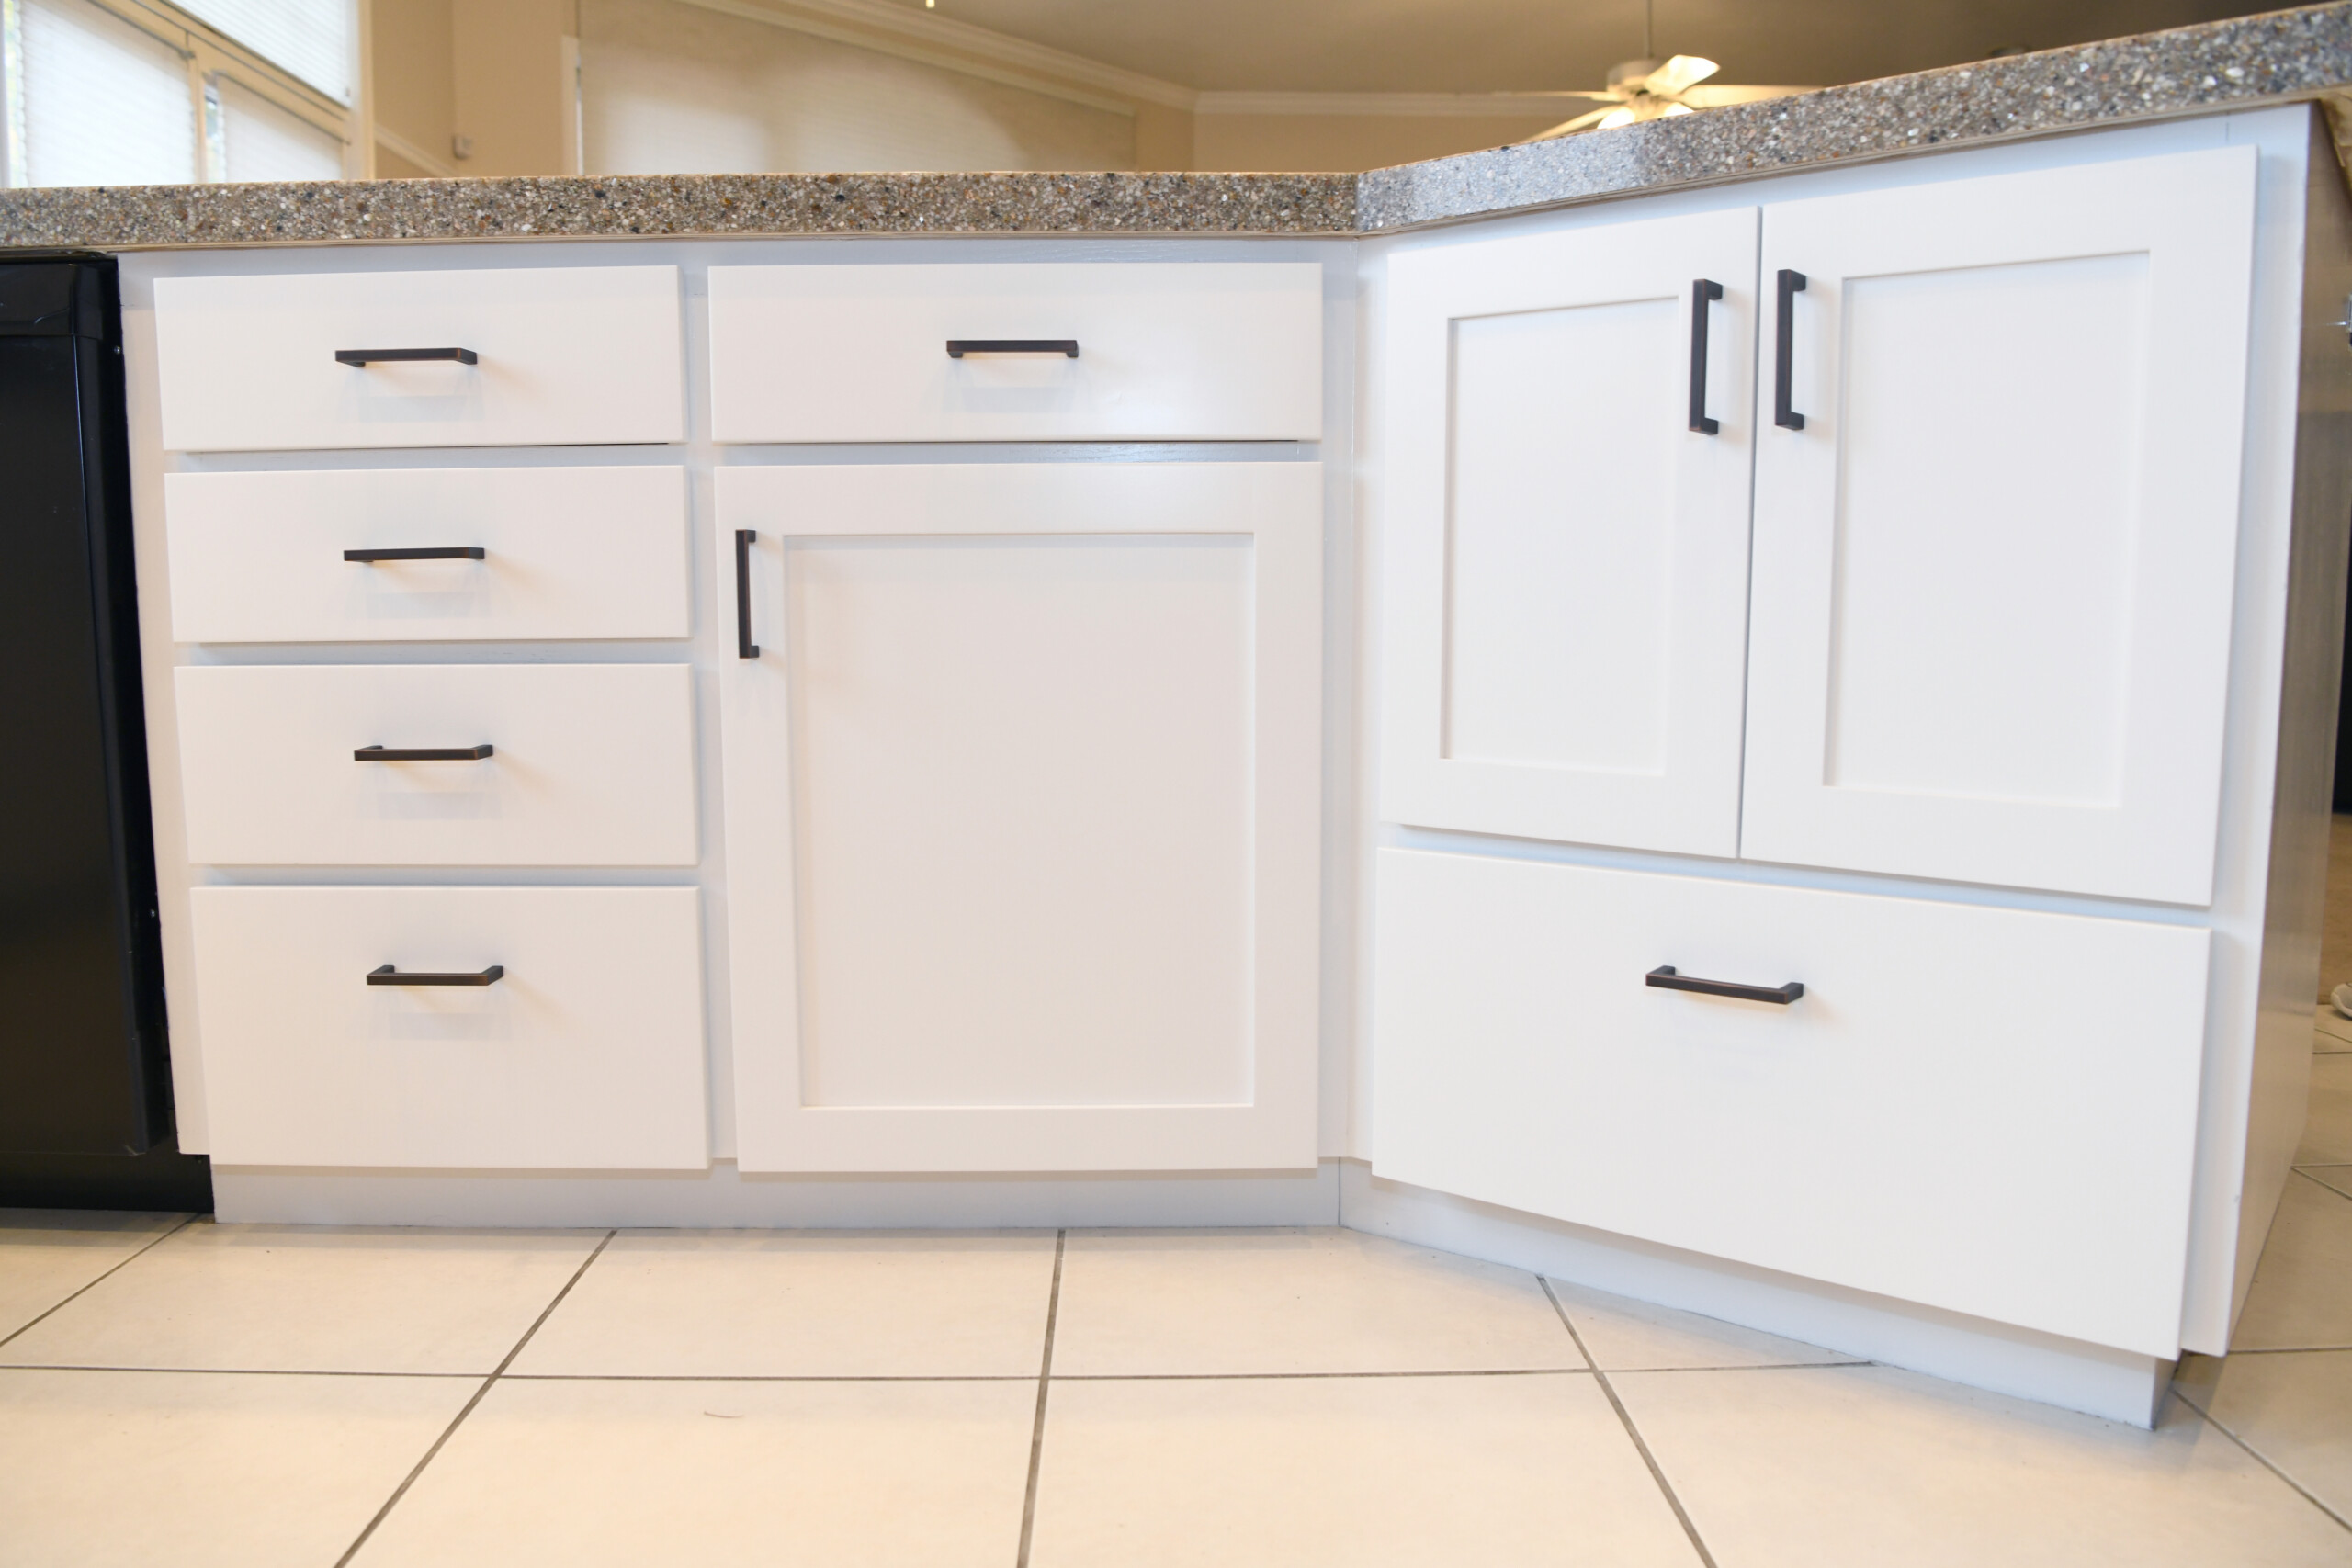 After-Kitchen Cabinet Refacing